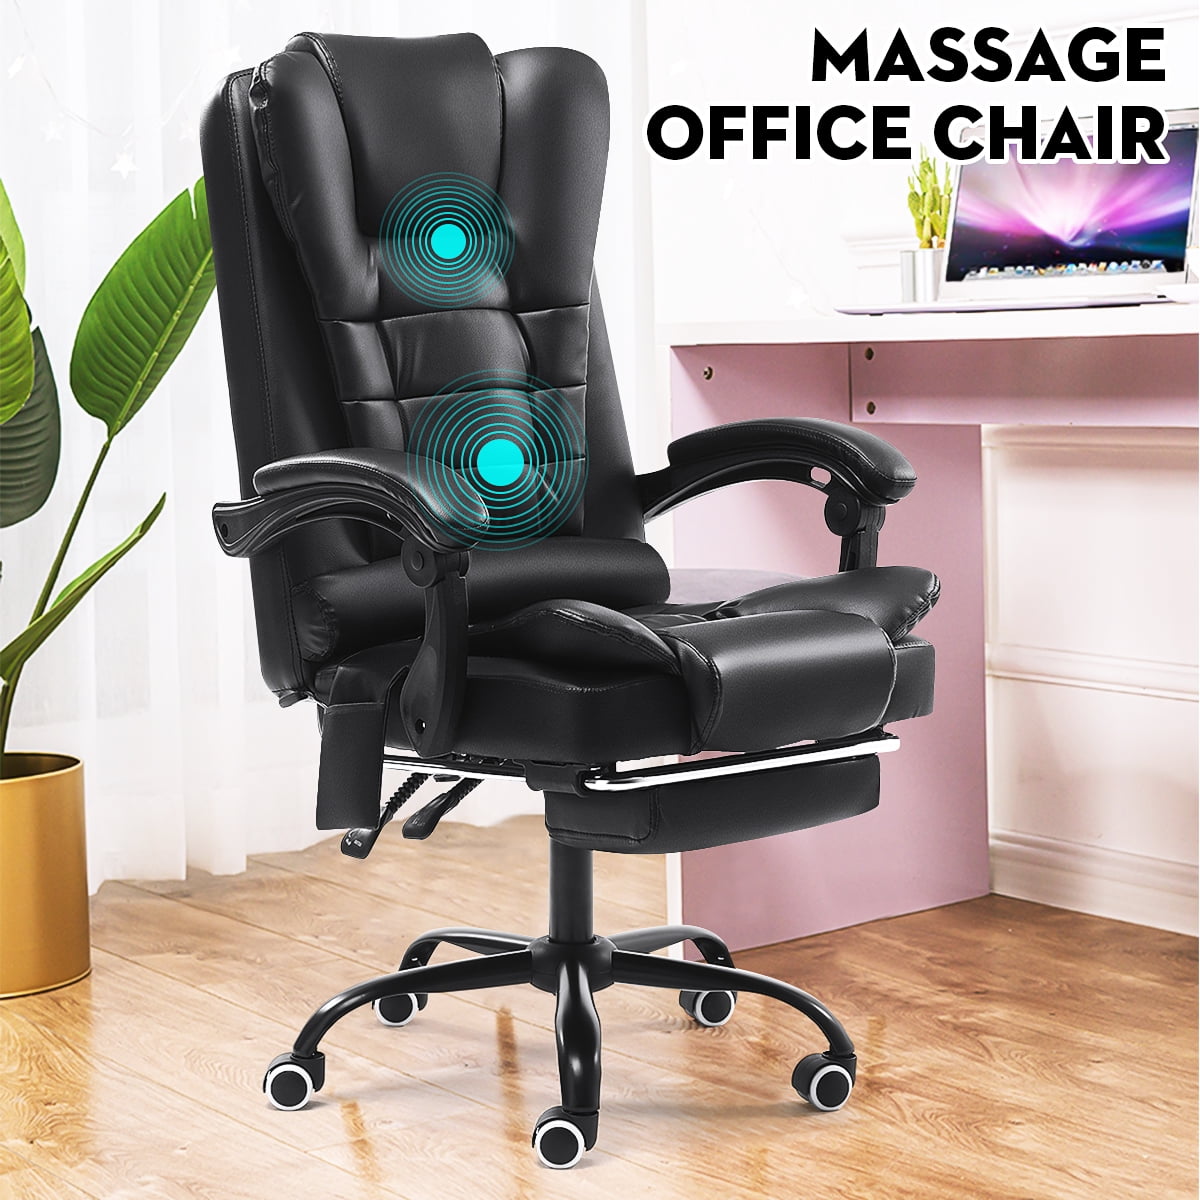 Ergonomic Office Chair High Back PU Leather Computer Chair Height  Adjustable Desk Chair Heated Massage Recliner Chair with Lumbar Support,  Cream